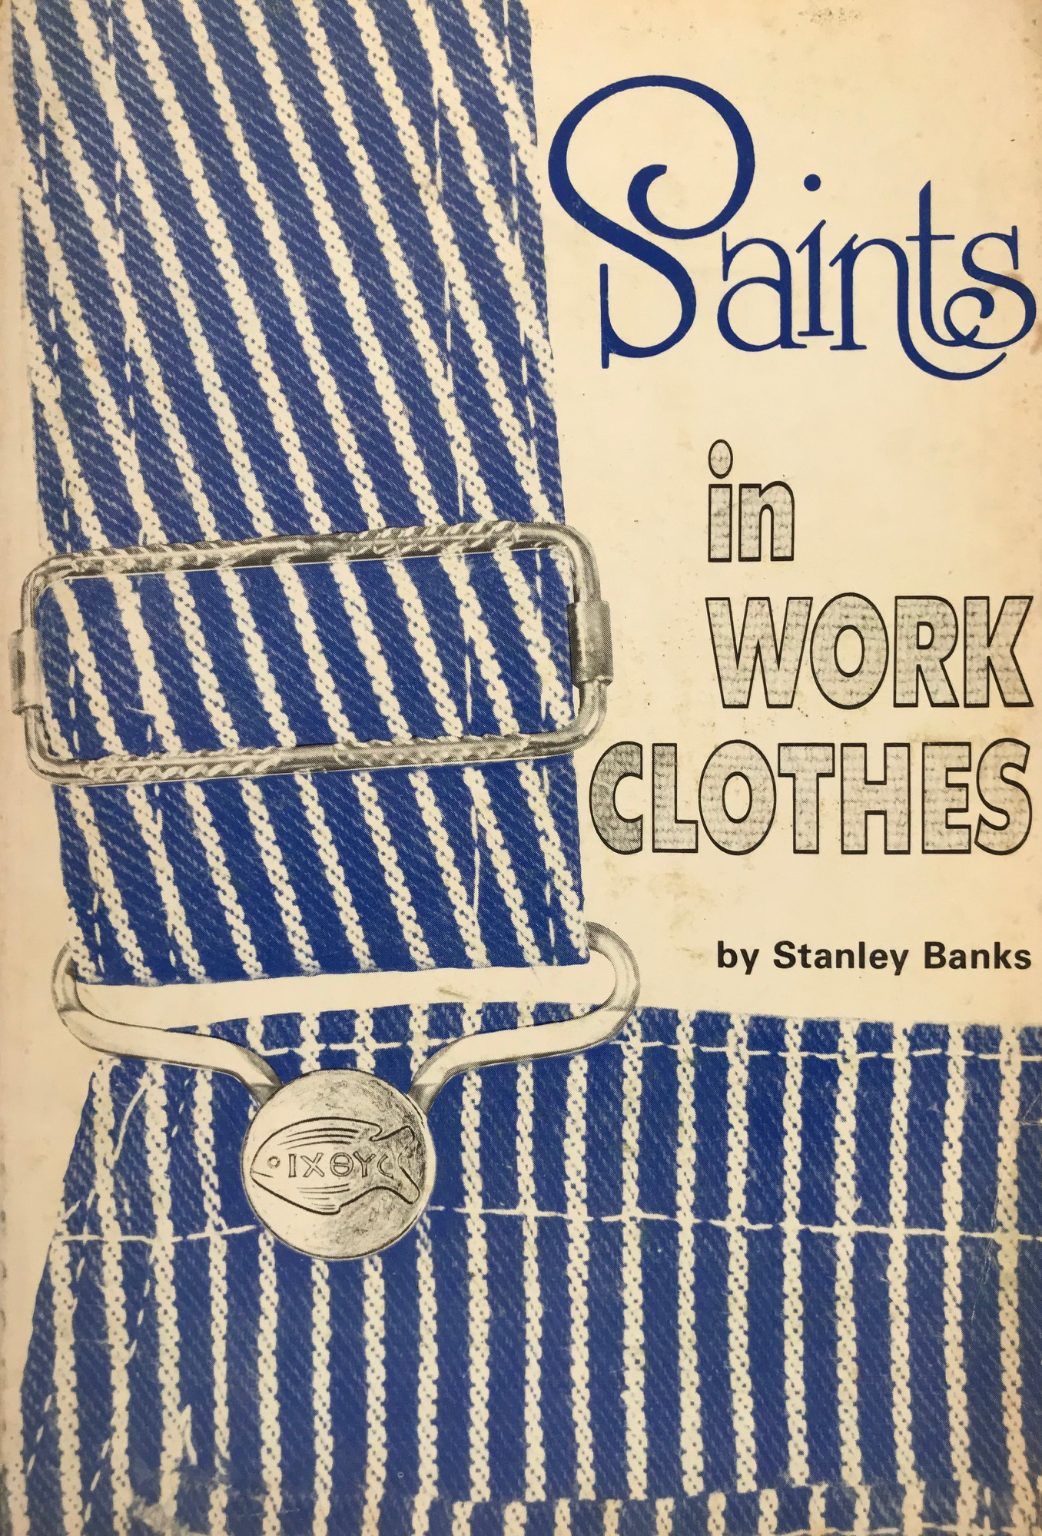 SAINTS IN WORK CLOTHES